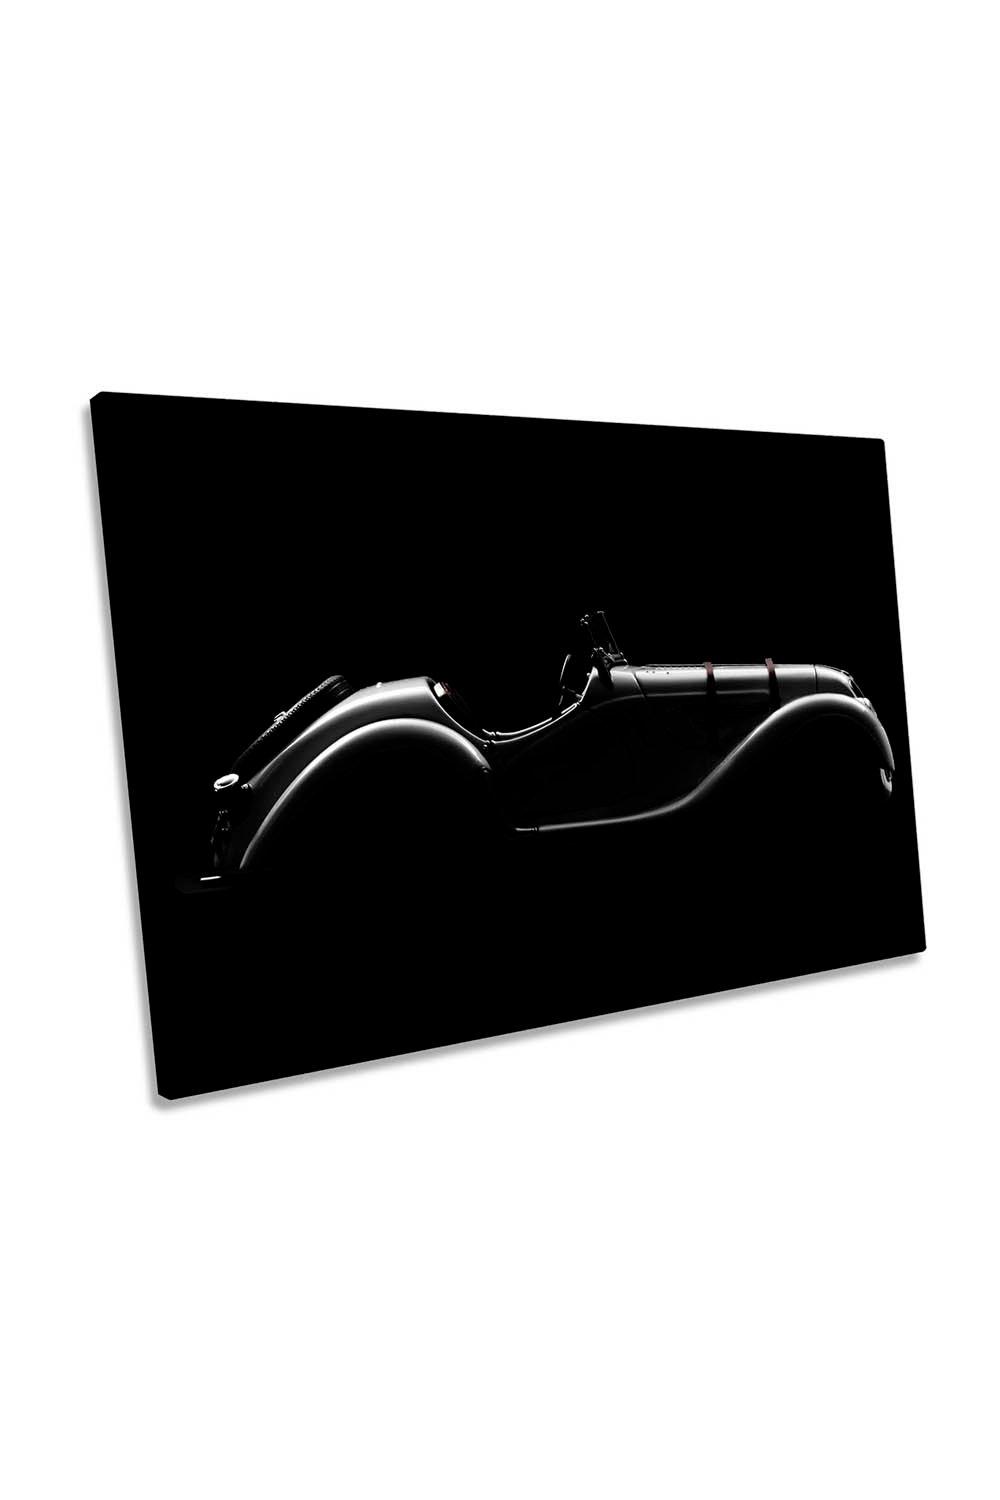 Silhouette Classic Car Convertible Canvas Wall Art Picture Print